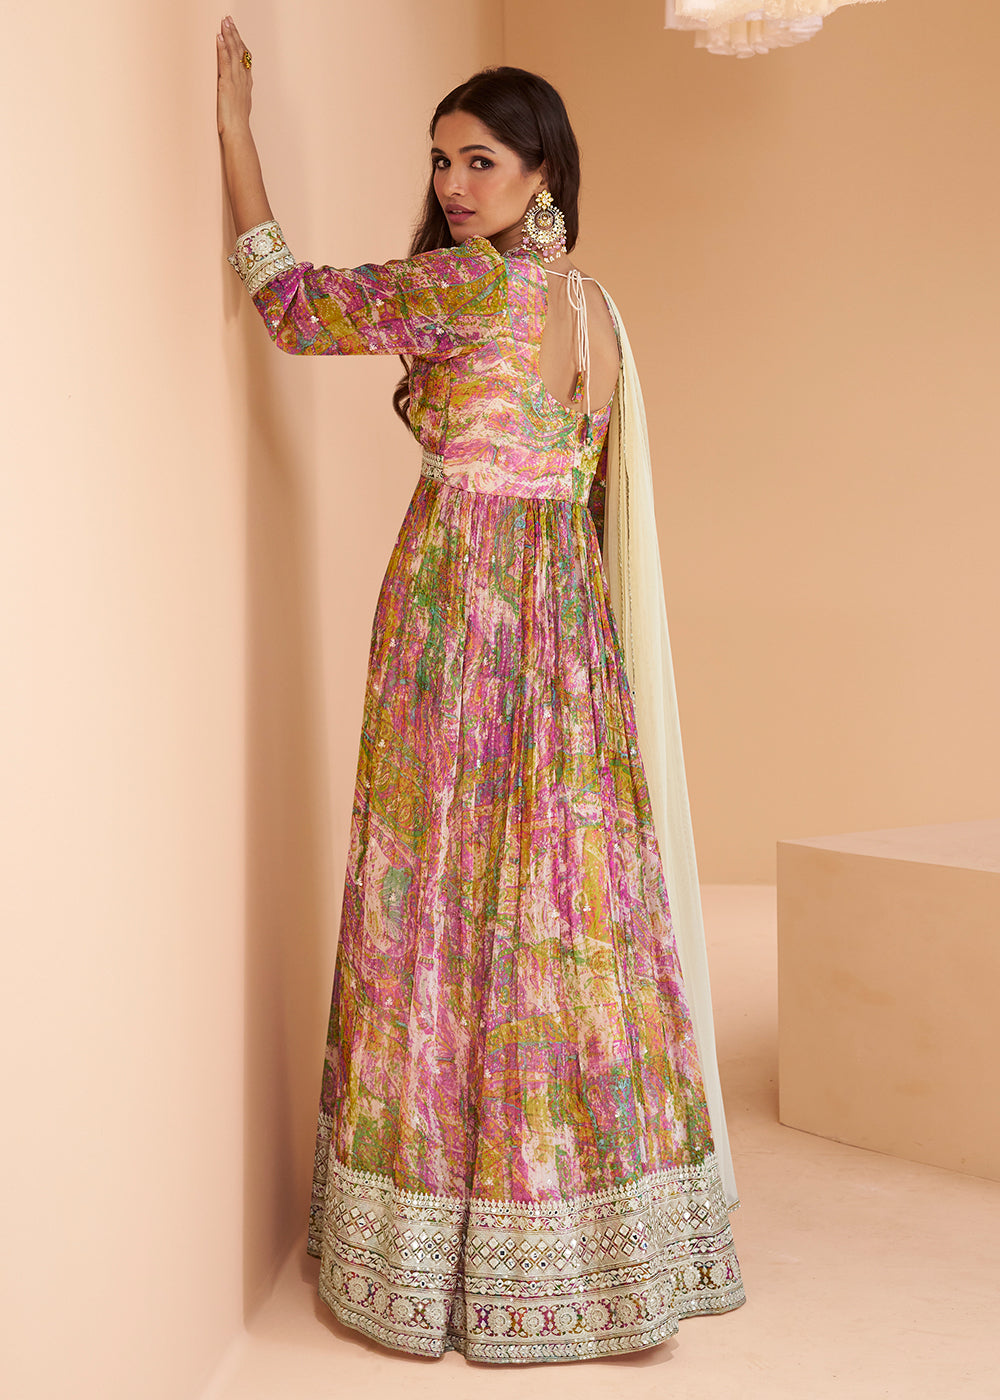 Buy Now Multicolor Pink Floral Printed Wedding Festive Anarkali Gown Online in USA, UK, Australia, Canada & Worldwide at Empress Clothing.